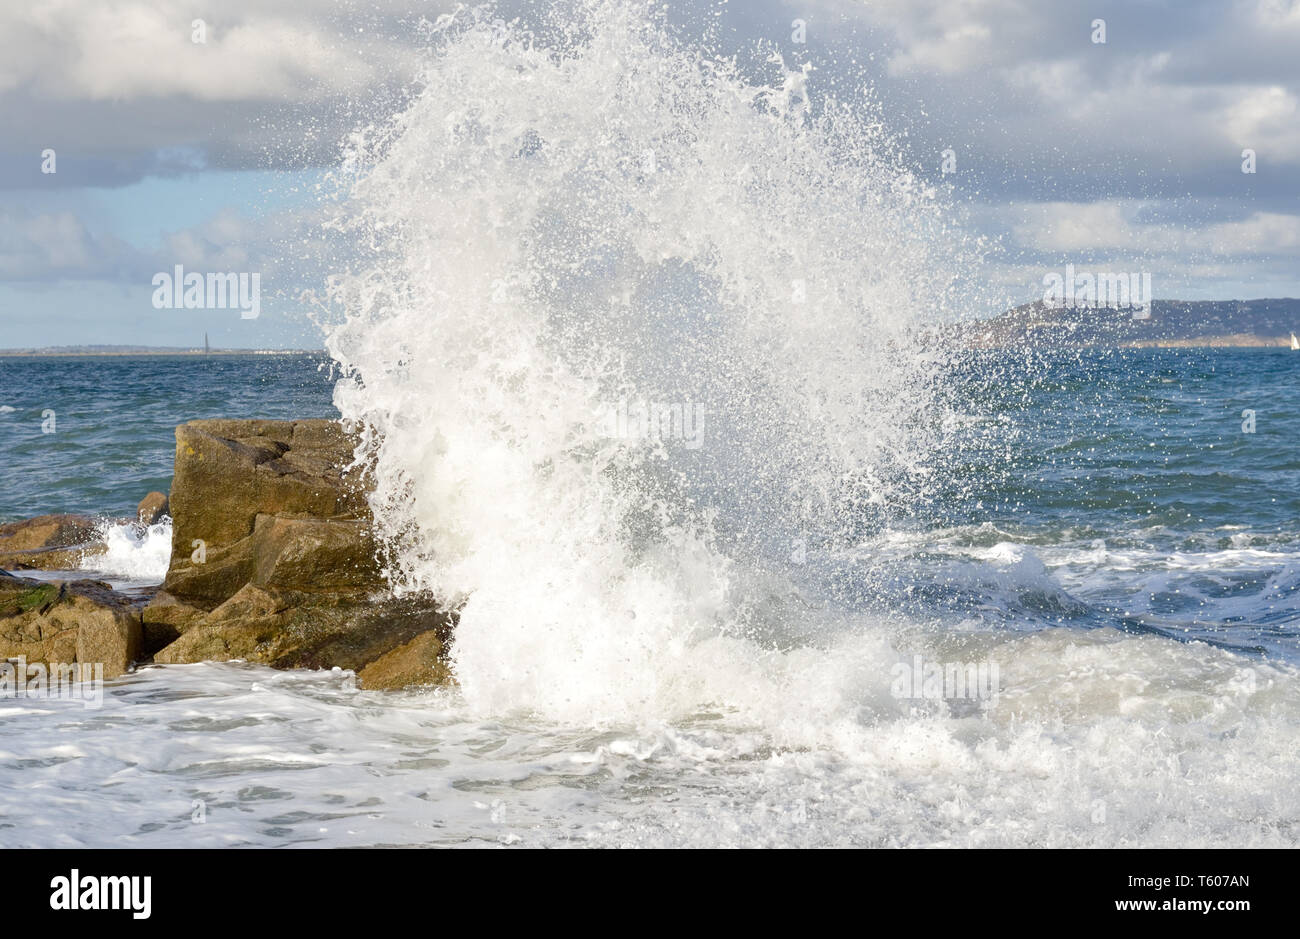 Power of nature.Waves impact onto rocks driven by onshore winds creating a dispersion of water spray. Stock Photo